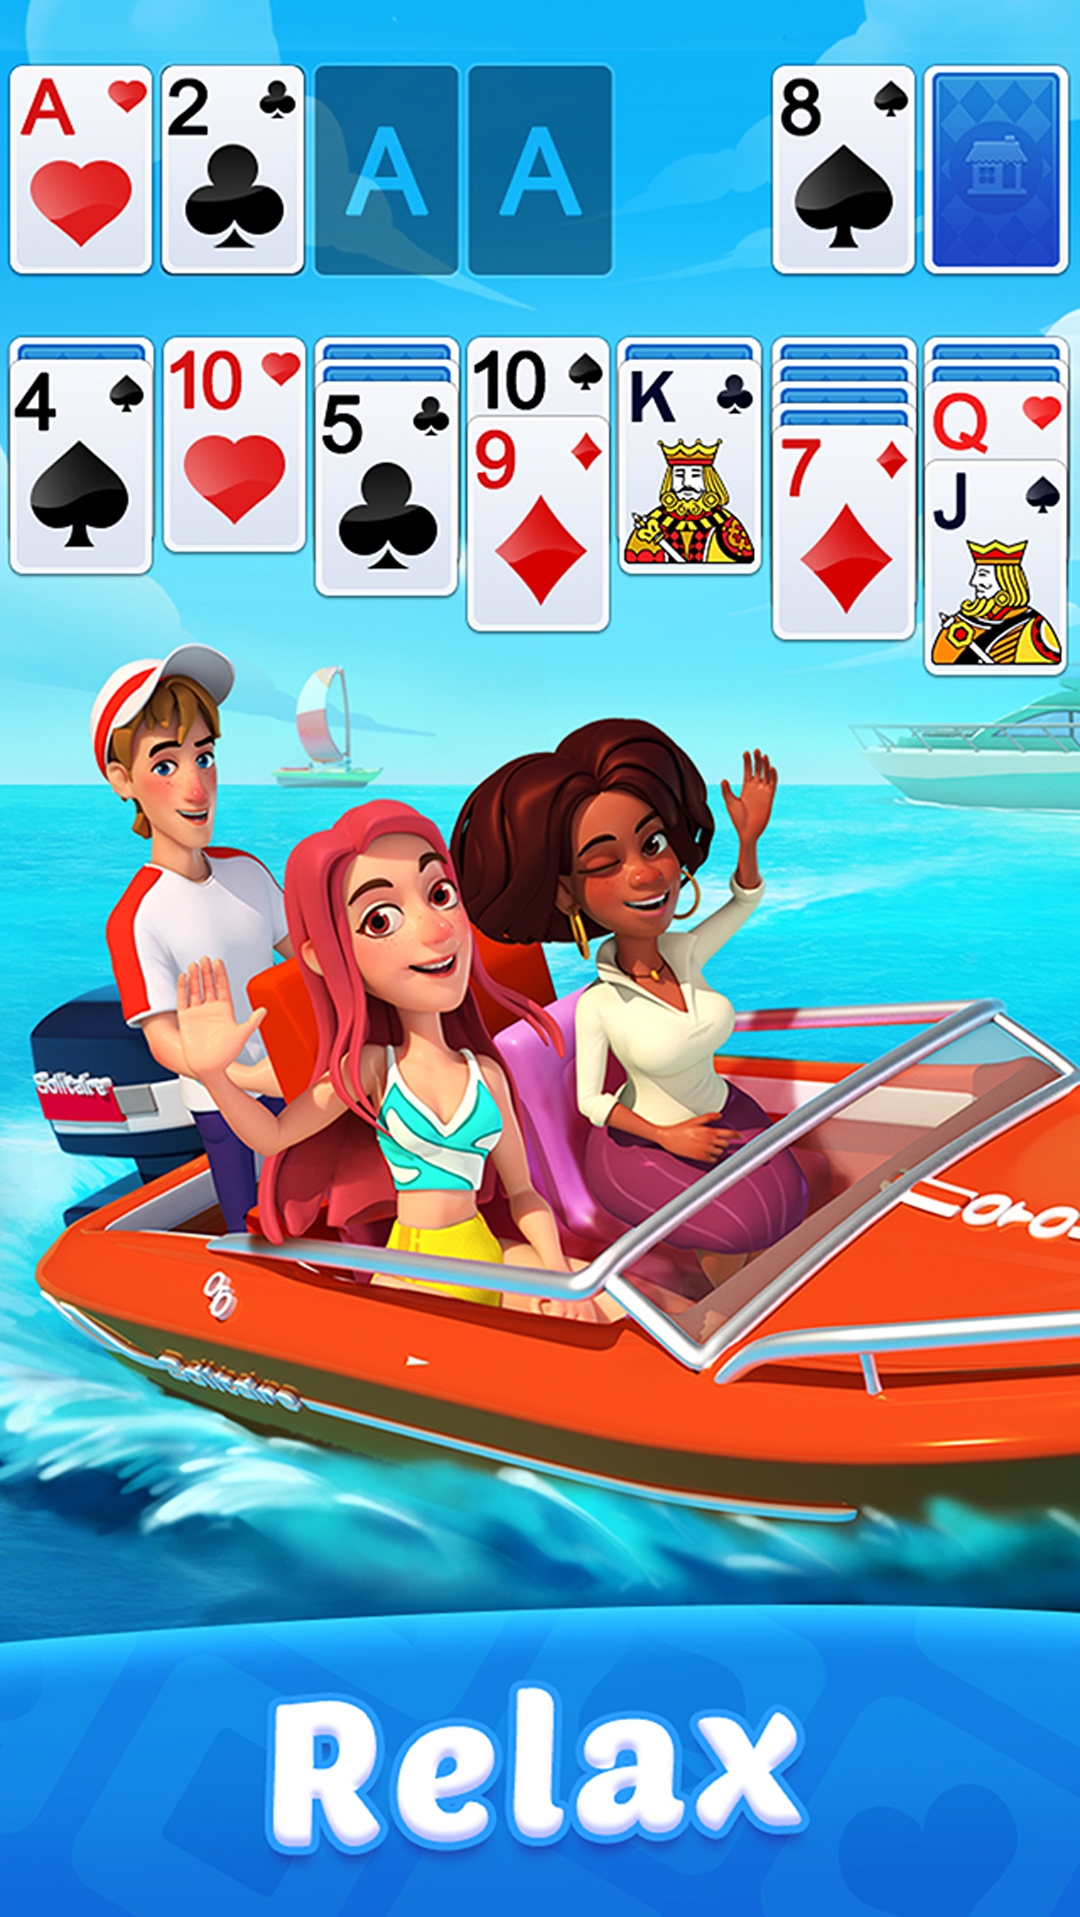 Scarica Solitaire: Card Games gratis per Android.